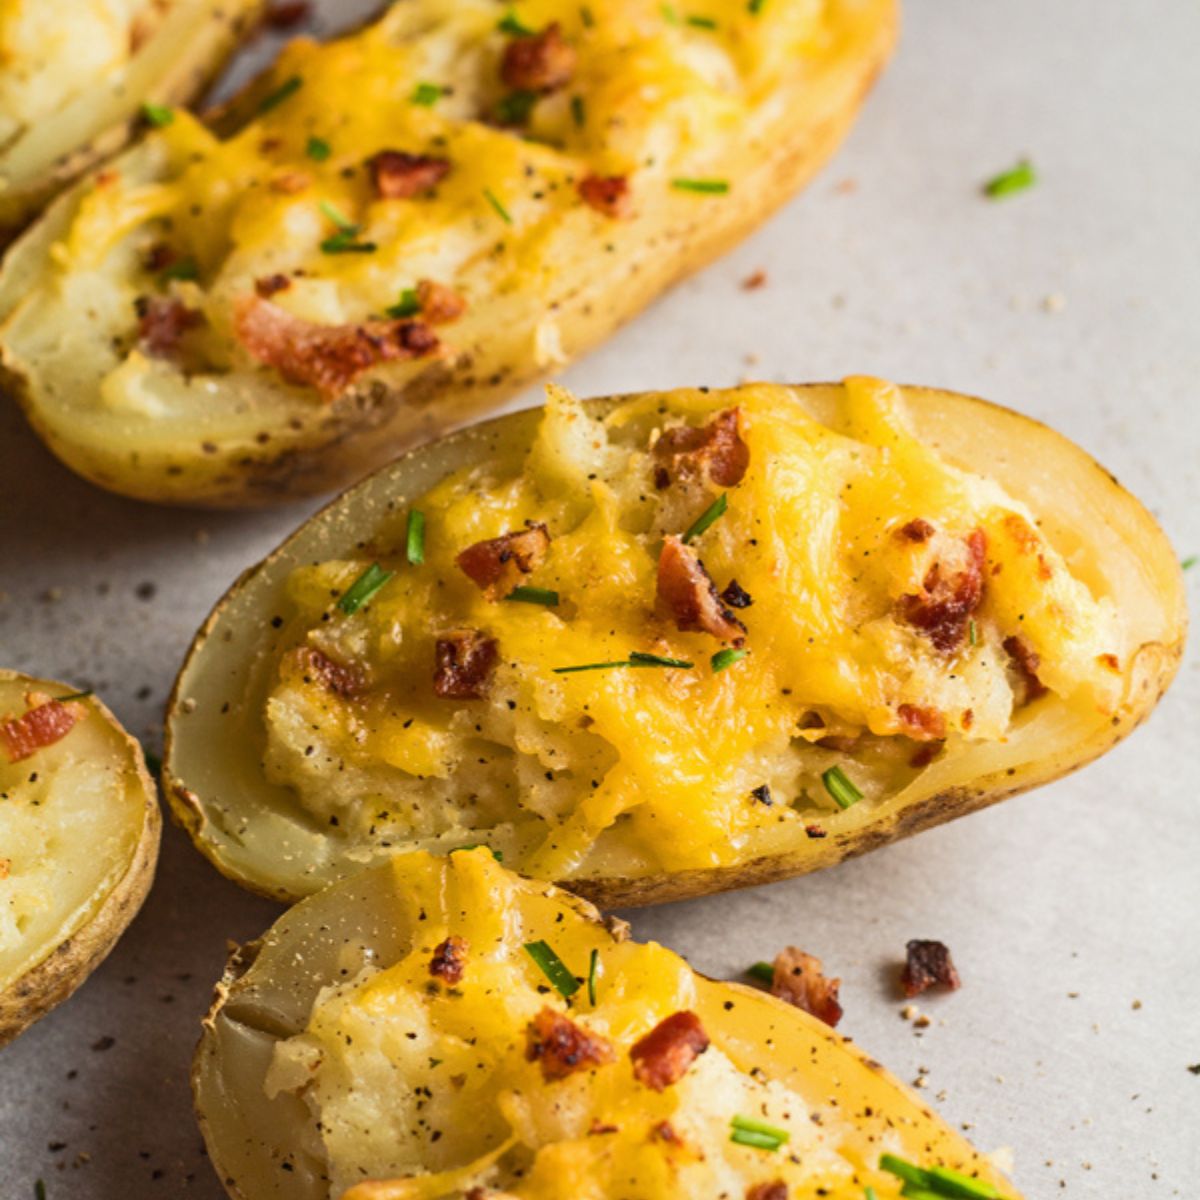 Best potato for baking potatoes or making twice baked potatoes as shown here.